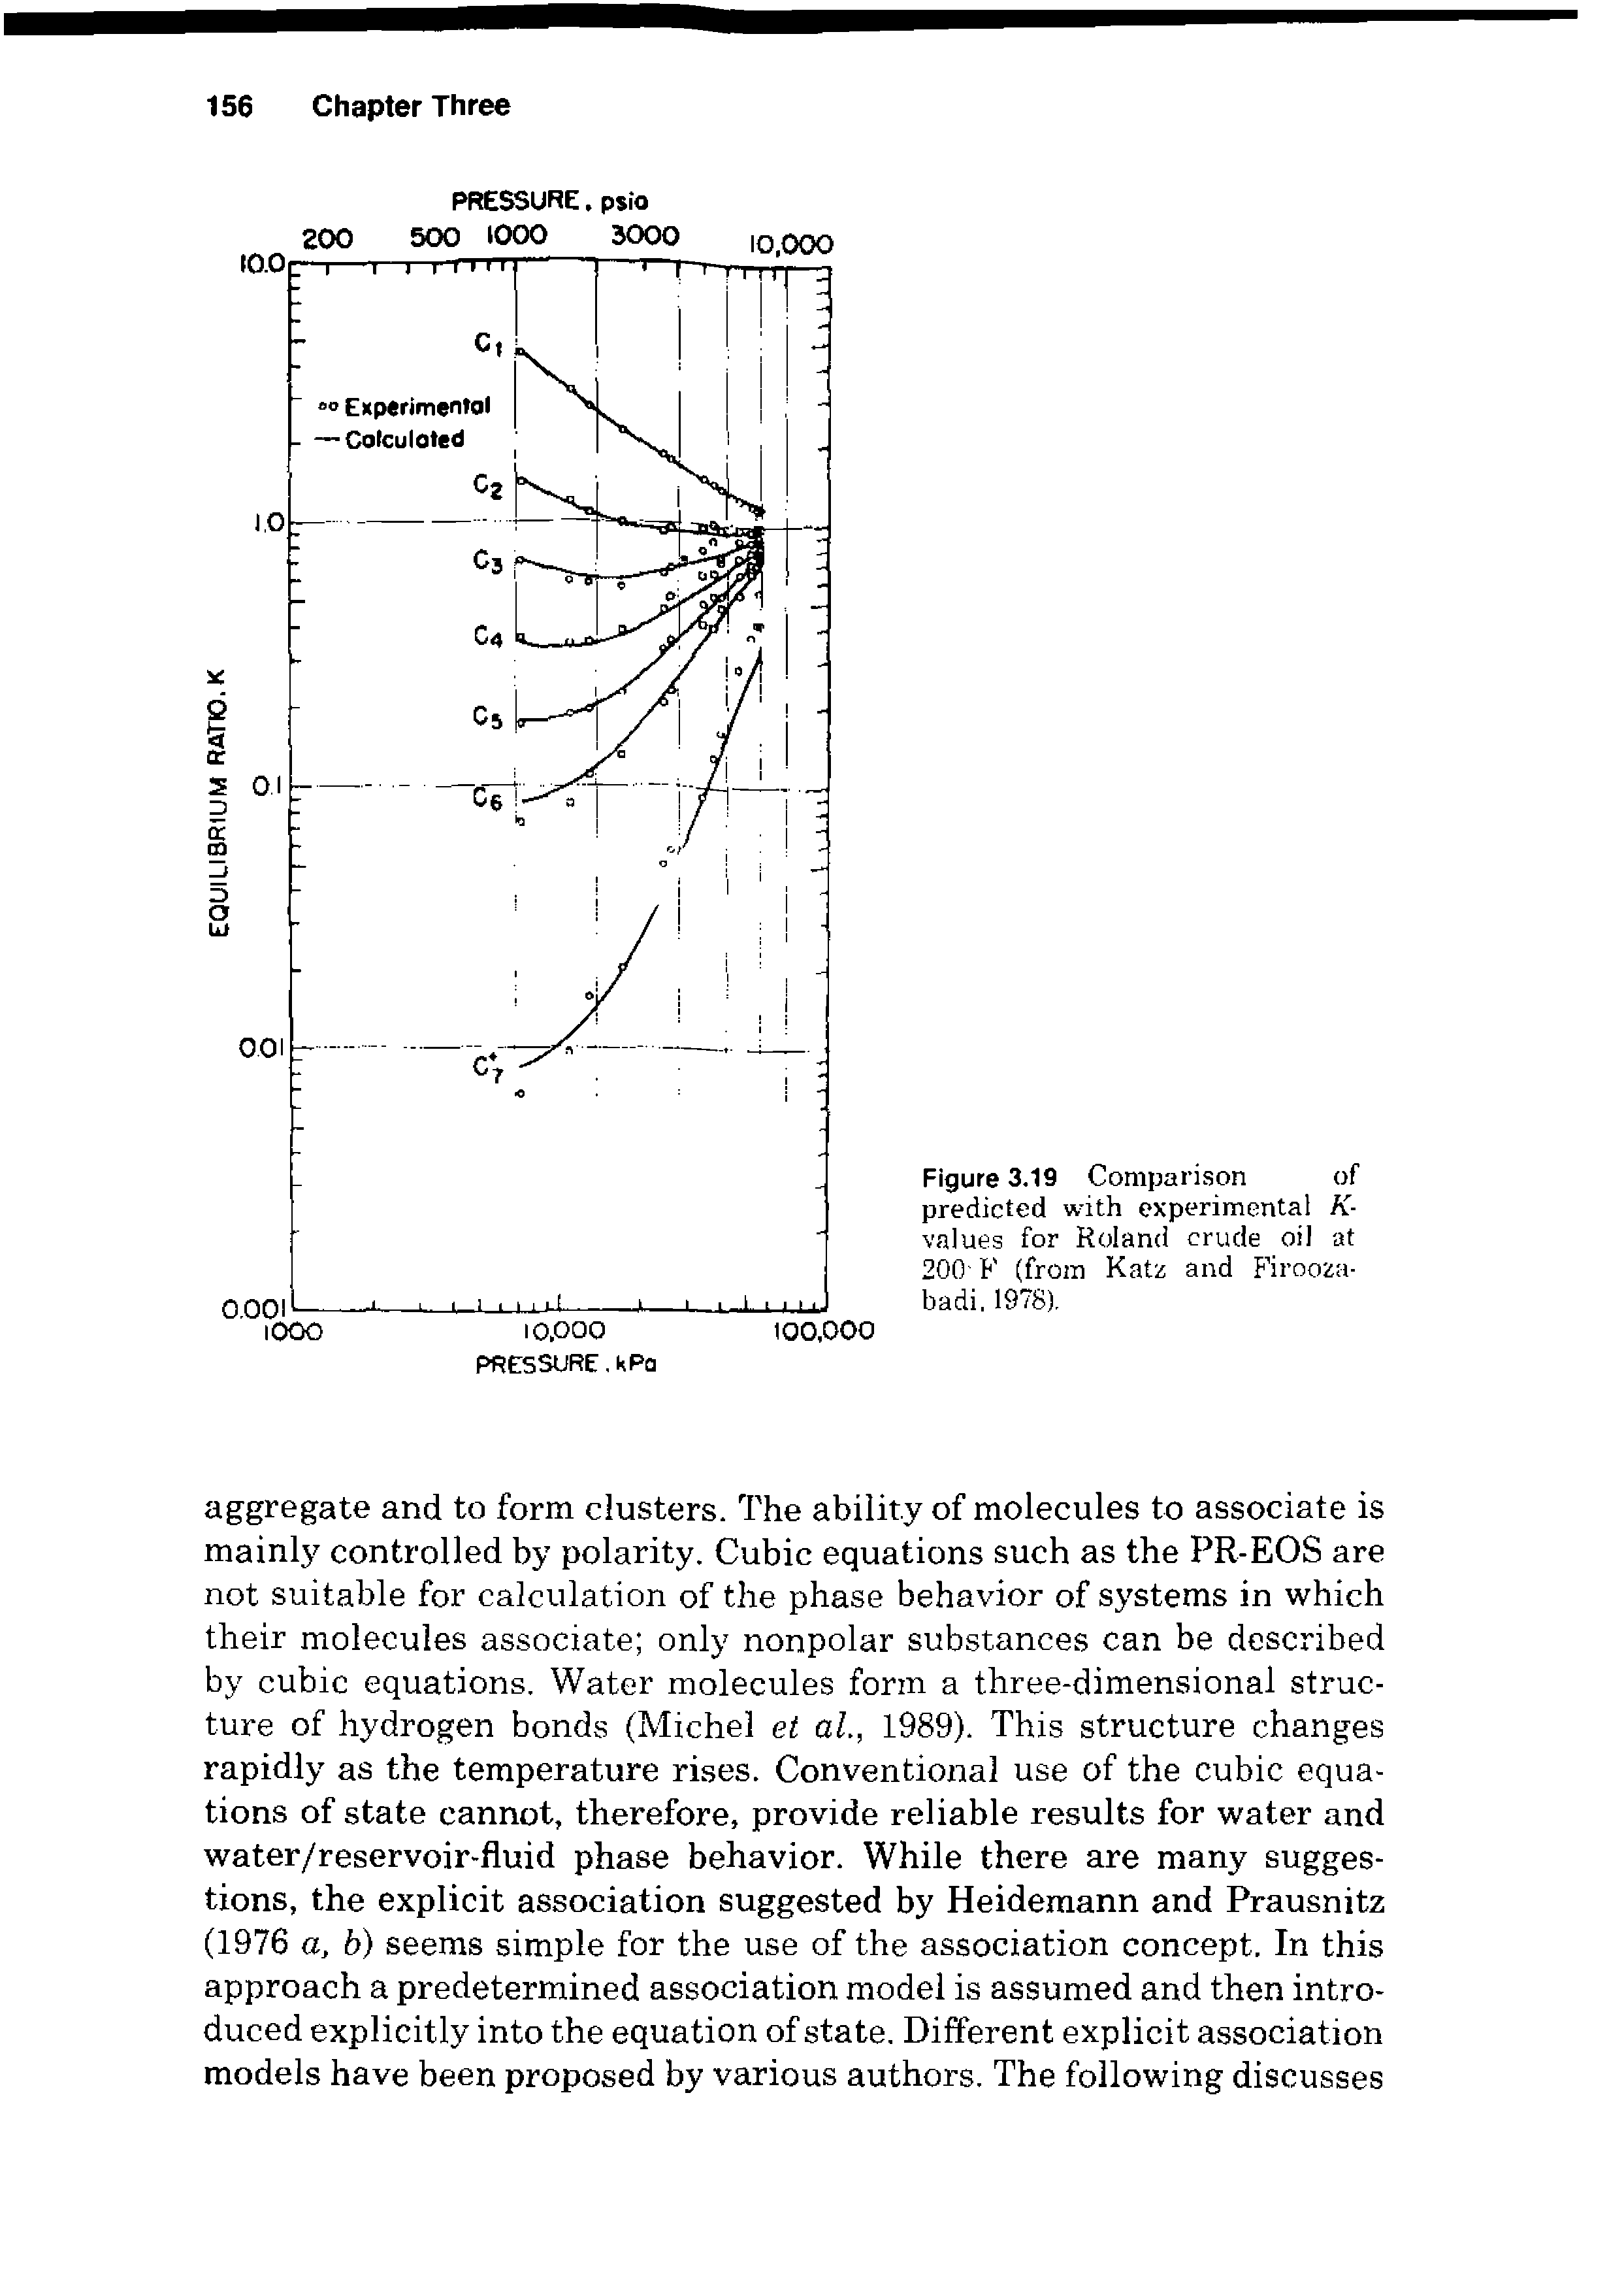 Figure 3.19 Comparison of predicted with experimental K-values for Roland crude oil at 200 F (from Katz and f irooza-badi, 1978),...